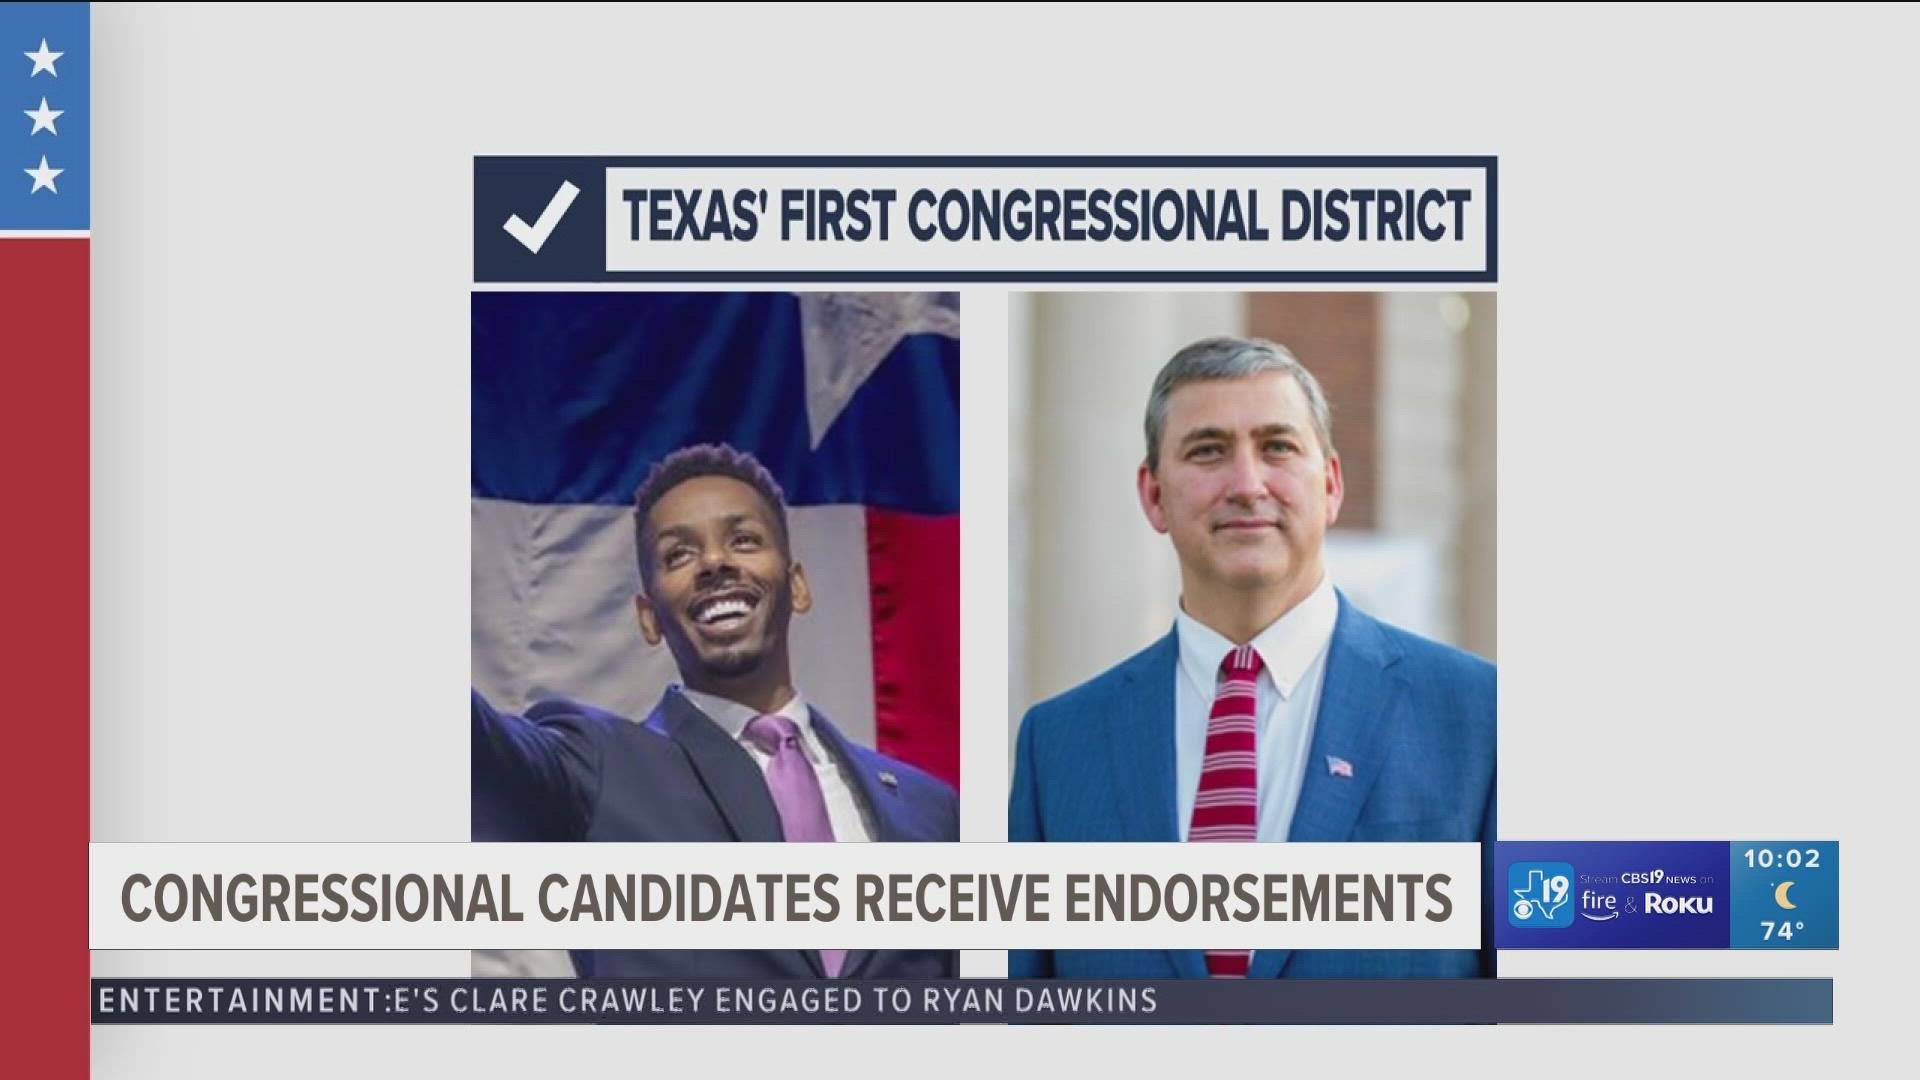 Candidates for Congressional District 1 have major endorsements cbs19.tv